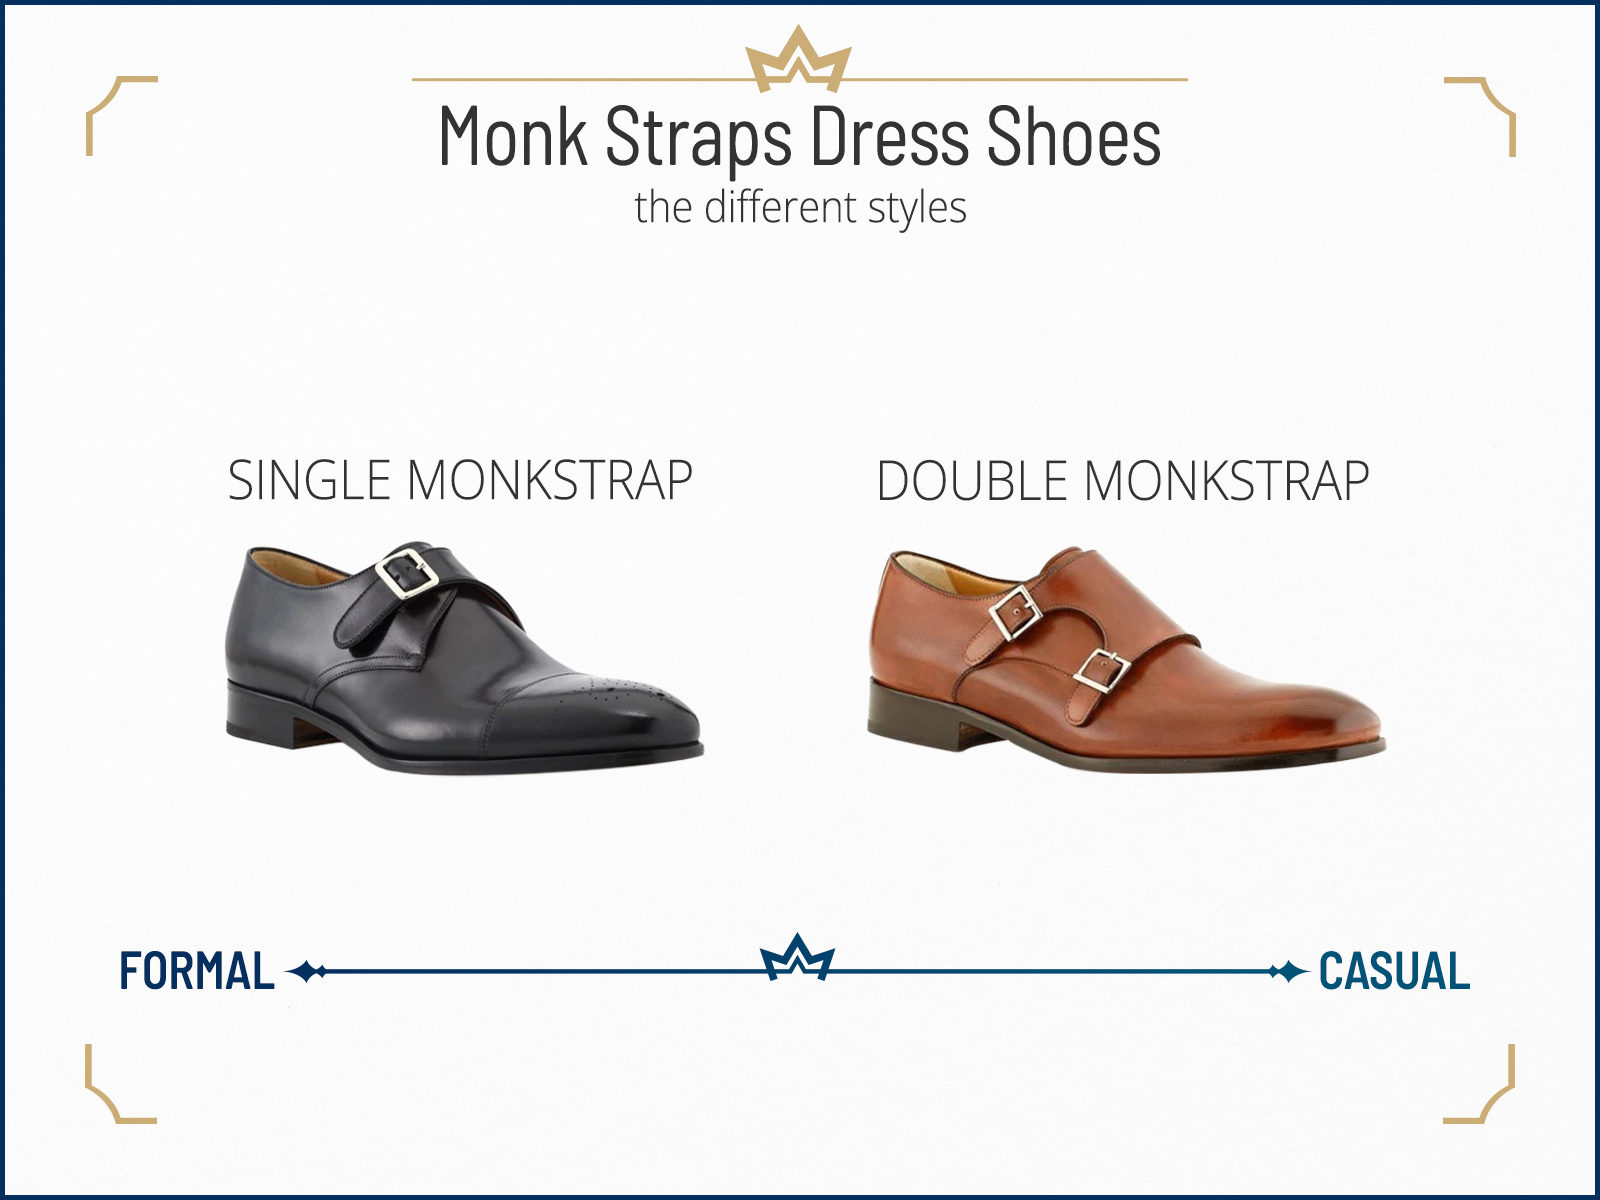 Different monk strap dress shoe types and their formality